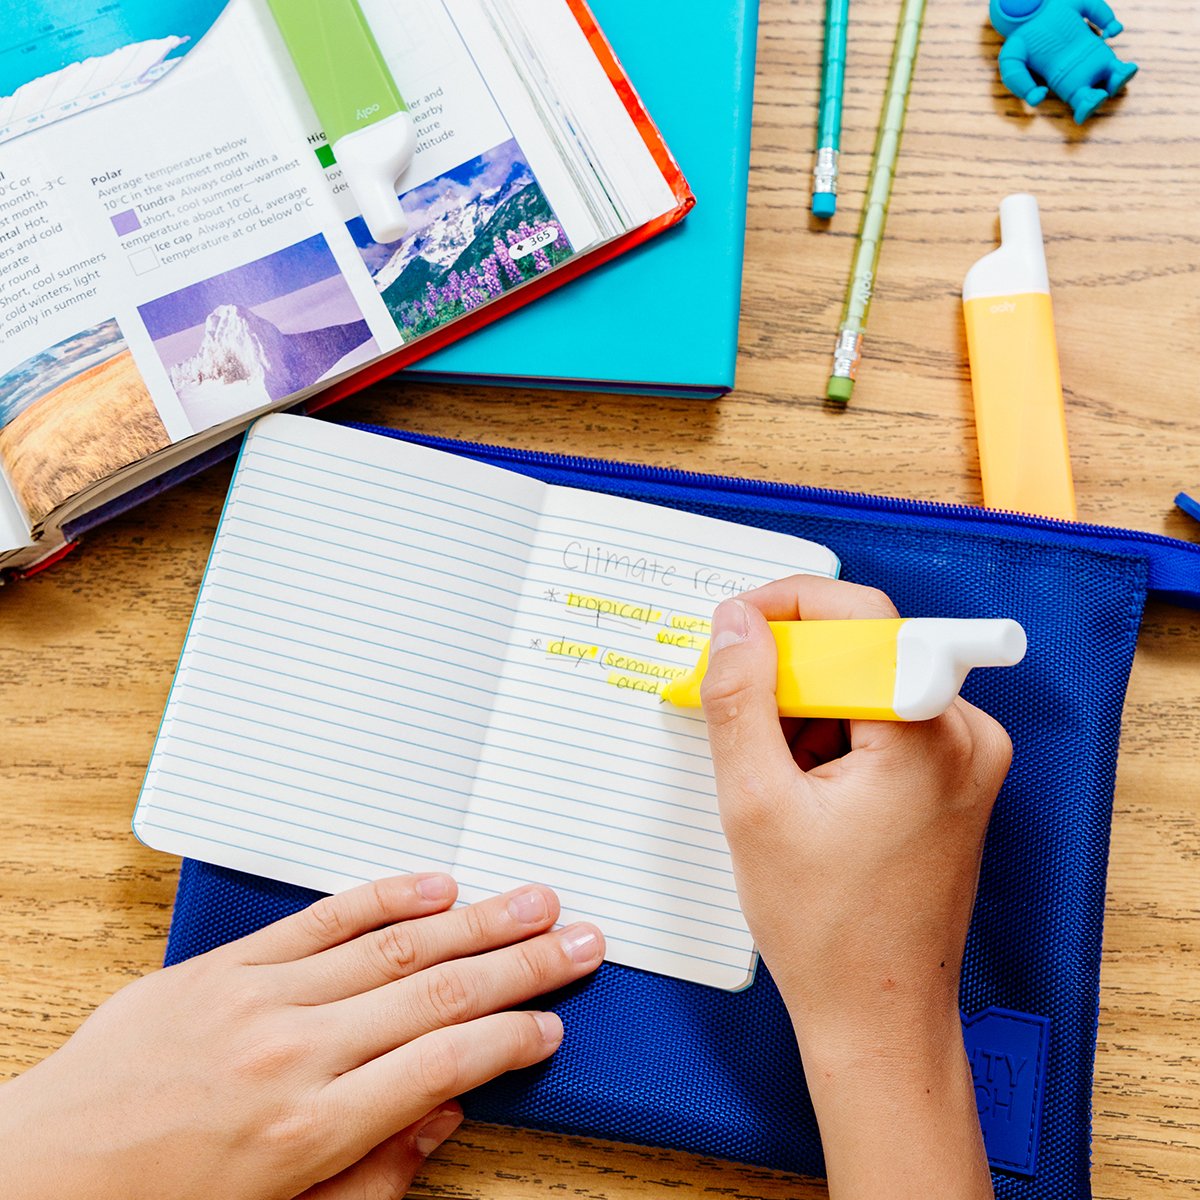 Image of kid's hands highlighting notes with yellow Do-Overs Highlighter